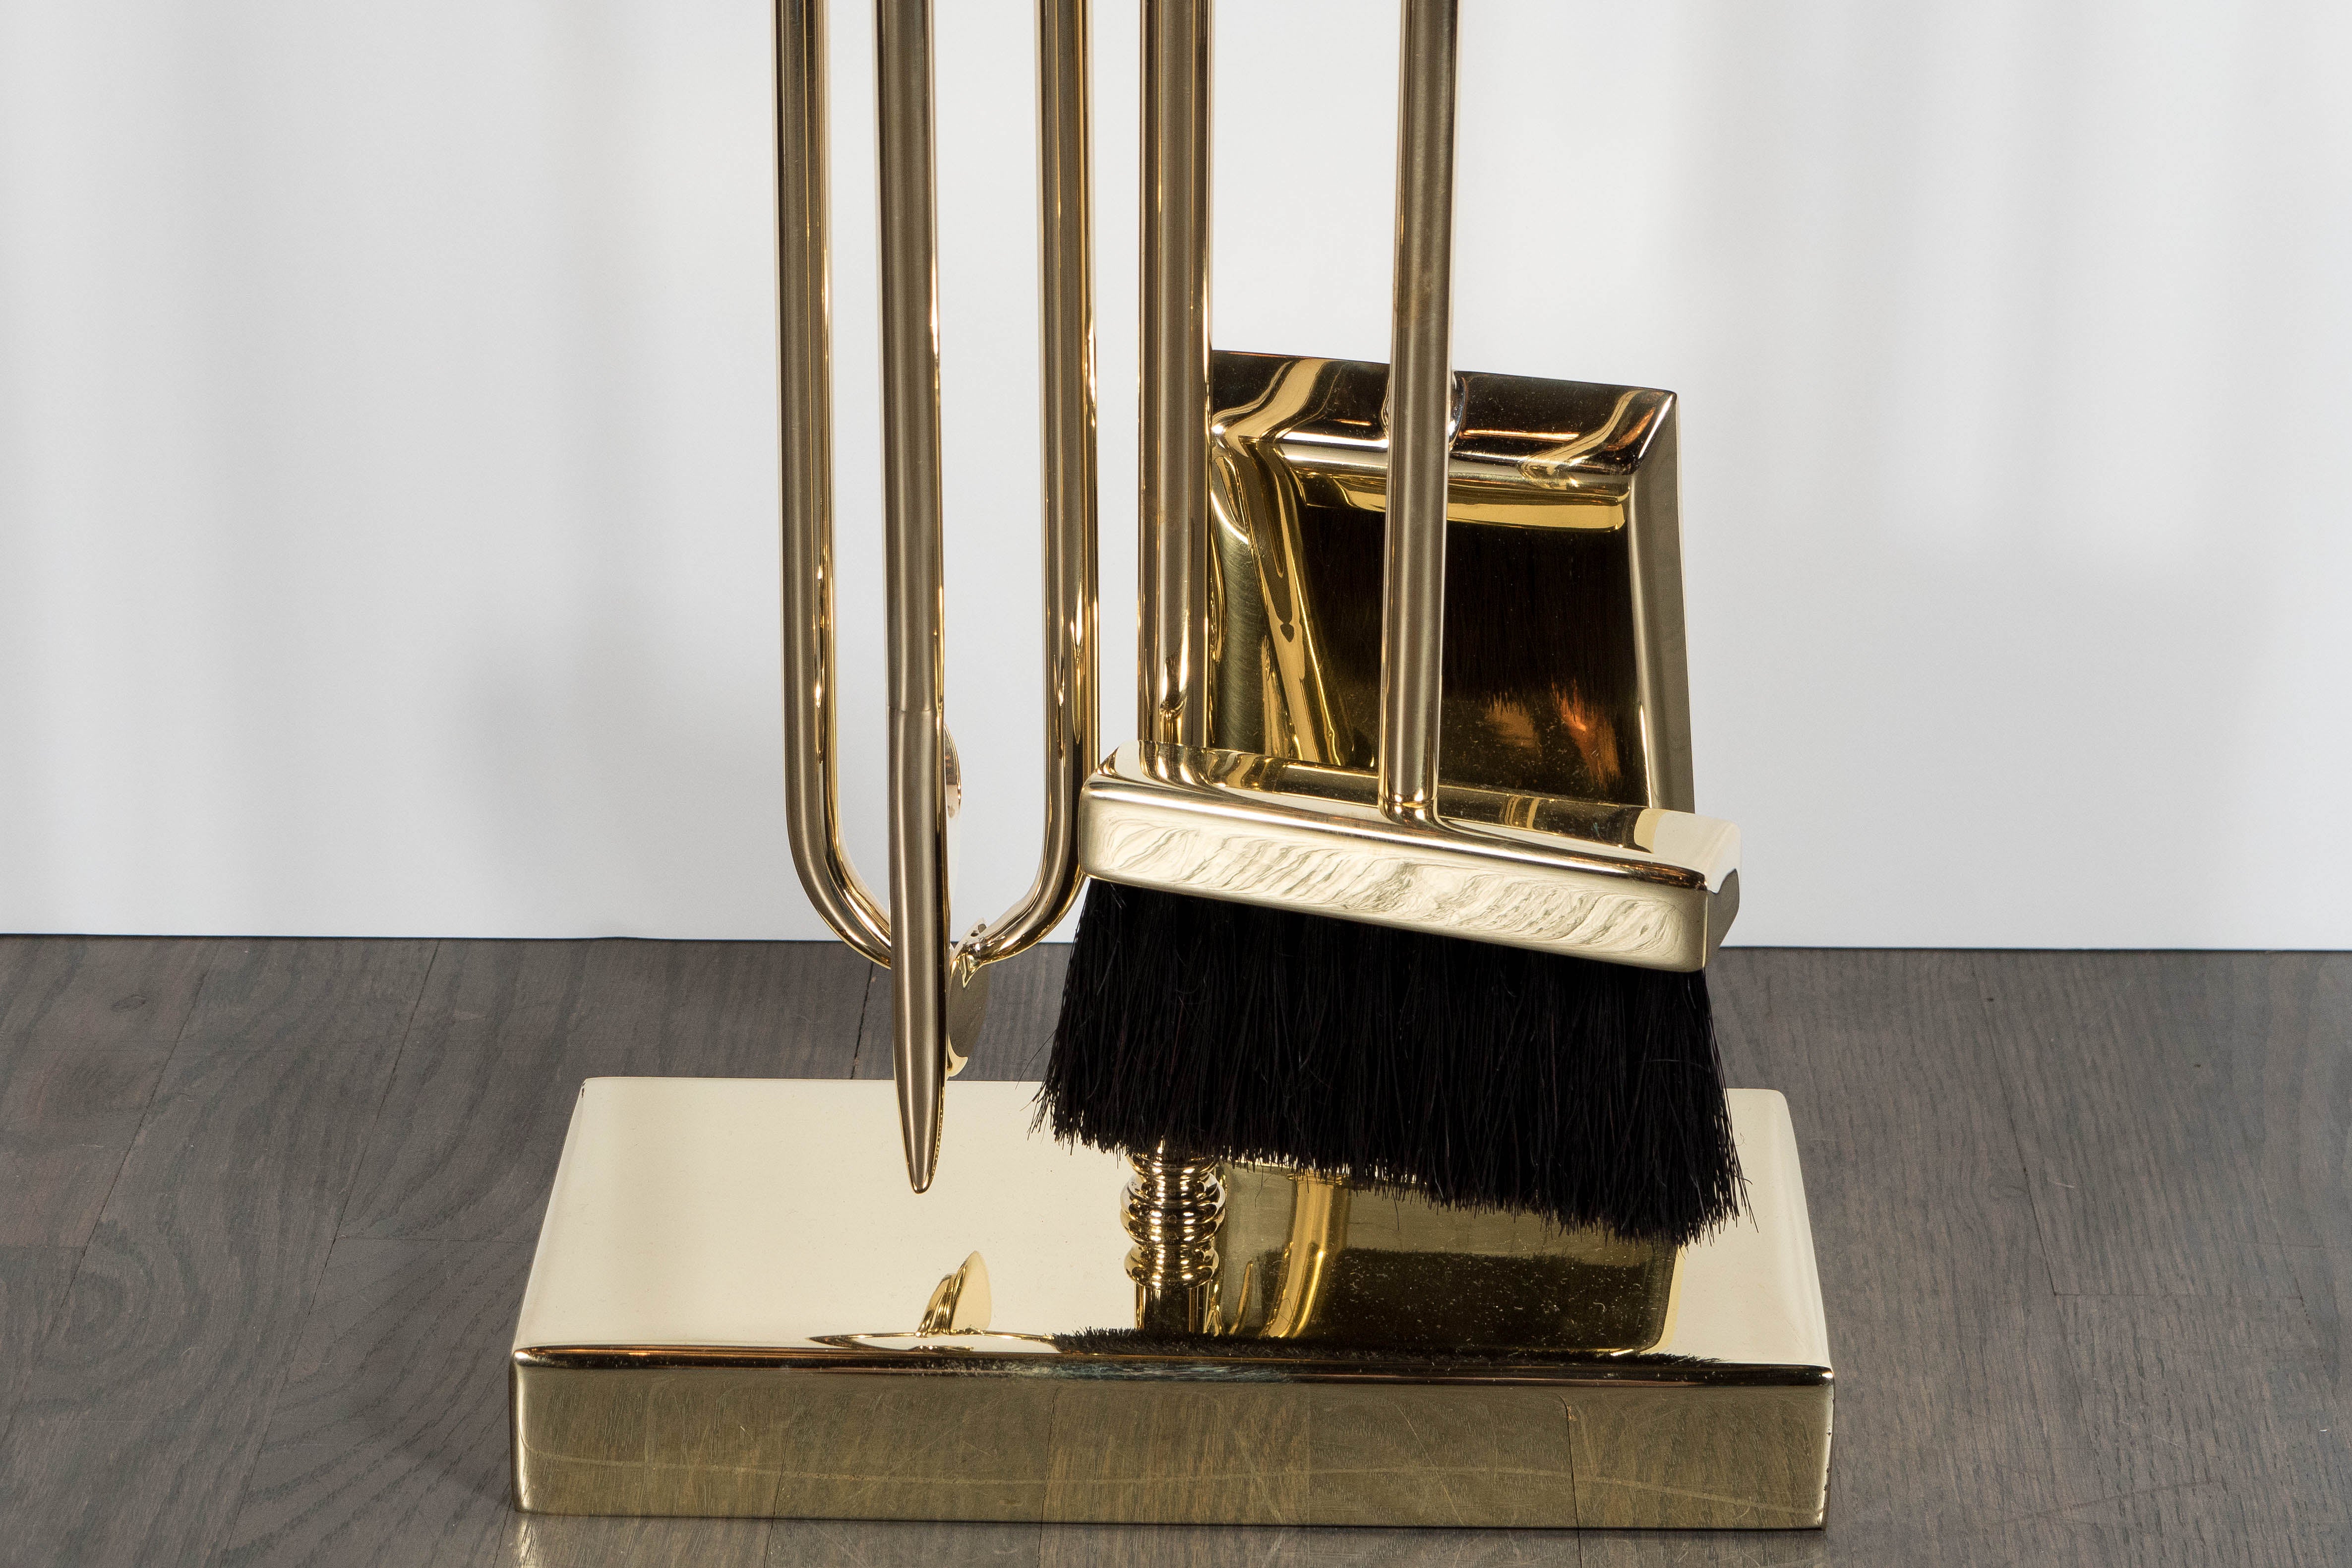 This refined and elegant modernist four-piece fire tool set was custom realized by artisans in New York State, exclusively for us. It features a shovel, brush, log holder and poker suspended from a notched rectangular top supported by a cylindrical